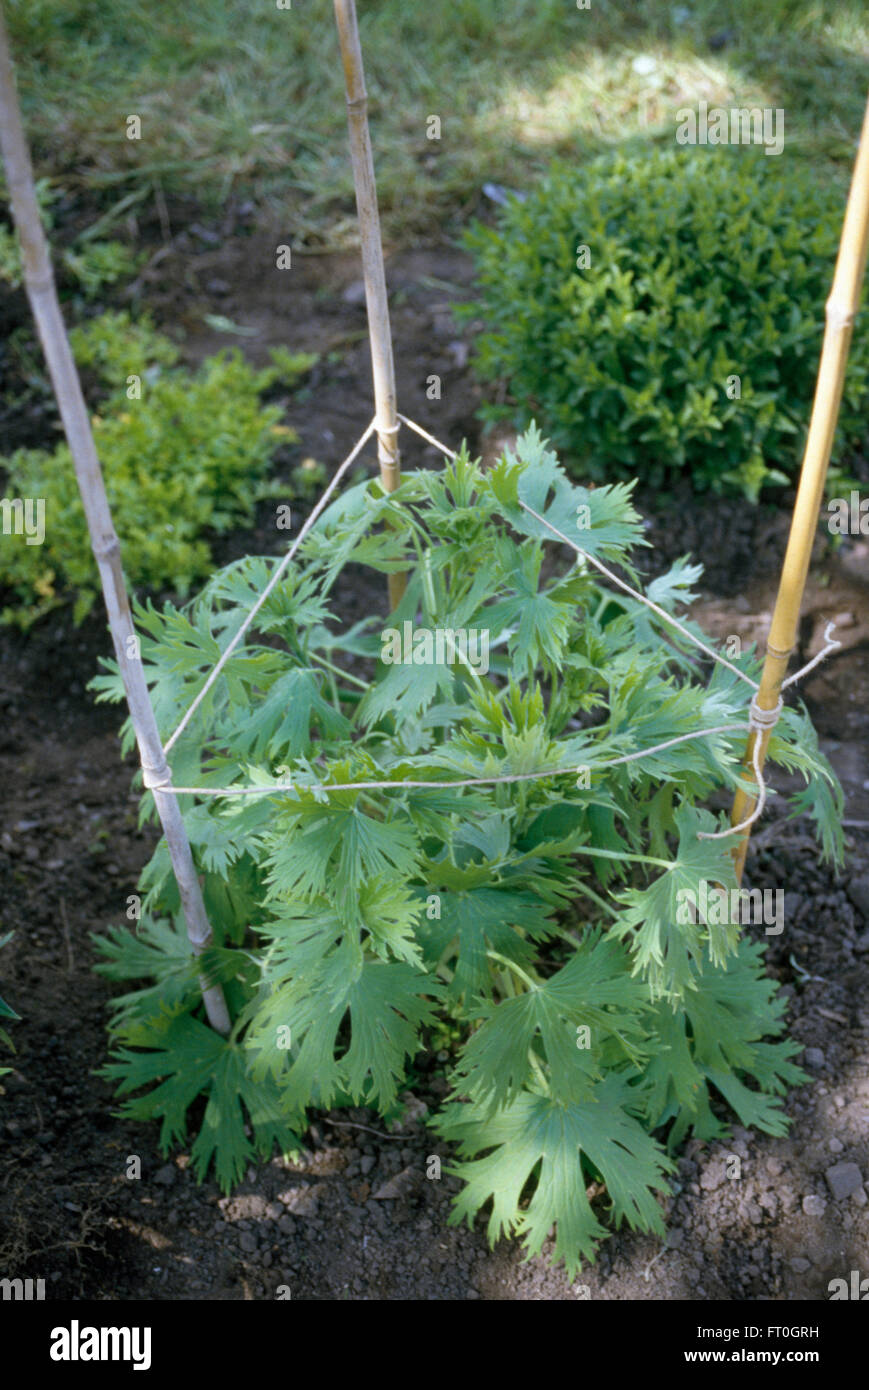 Close-up of a delphinium plant supported by bamboo canes and string Stock Photo